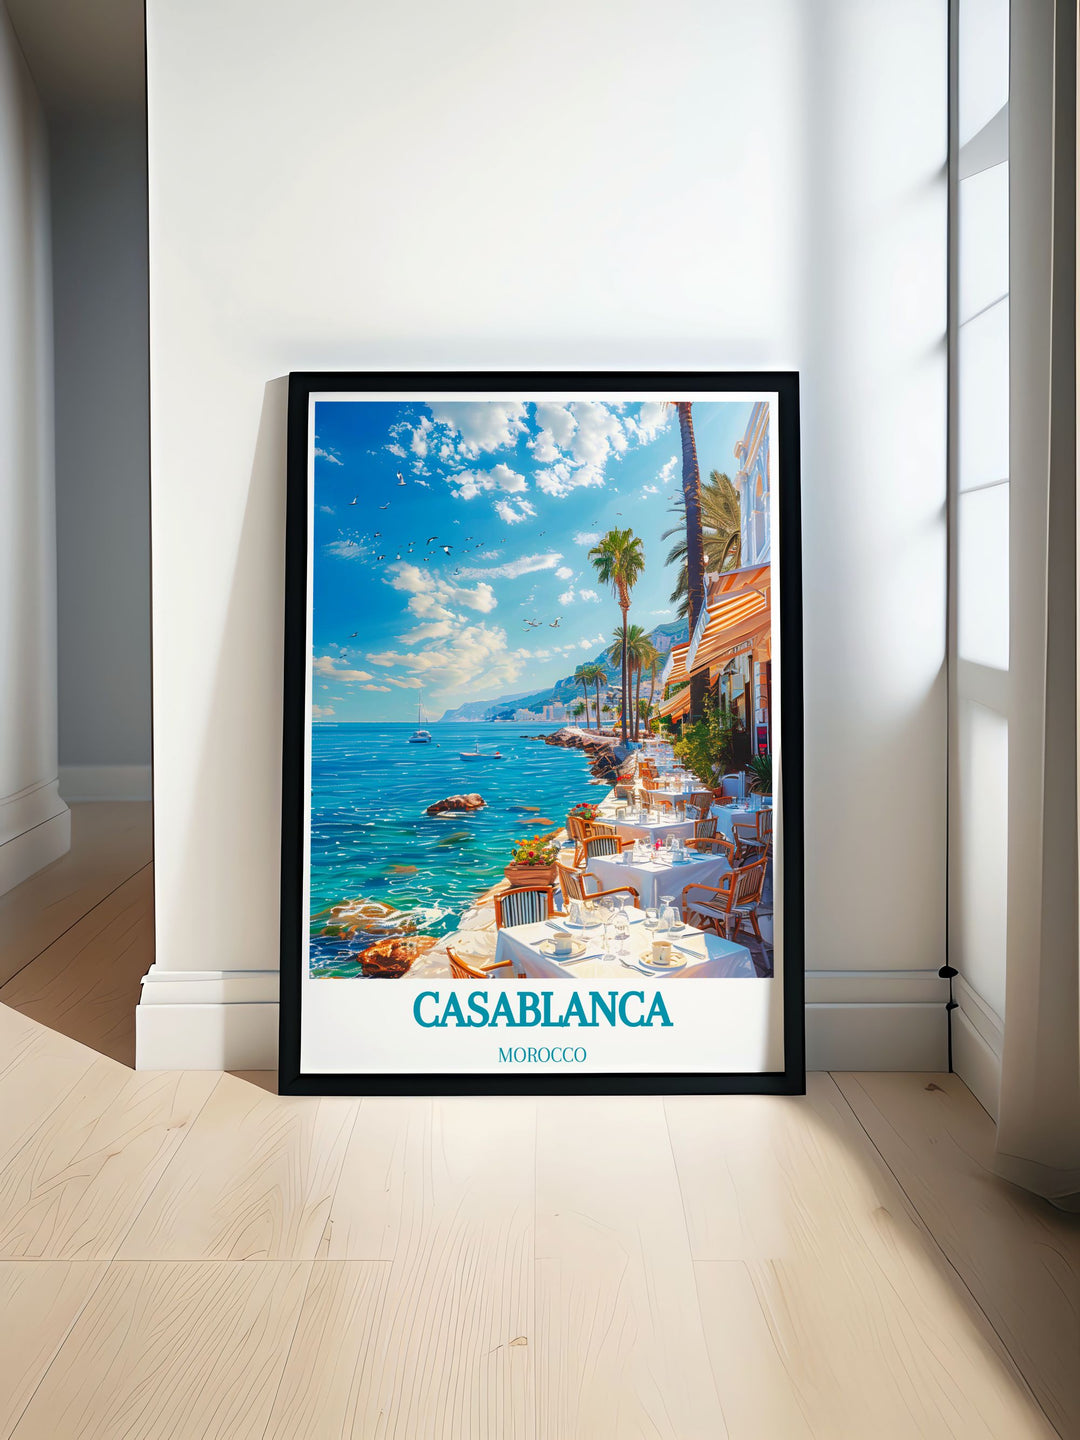 Vibrant art print of Casablanca showcasing the bustling city life and iconic Moroccan architecture, ideal for enhancing any global art collection.